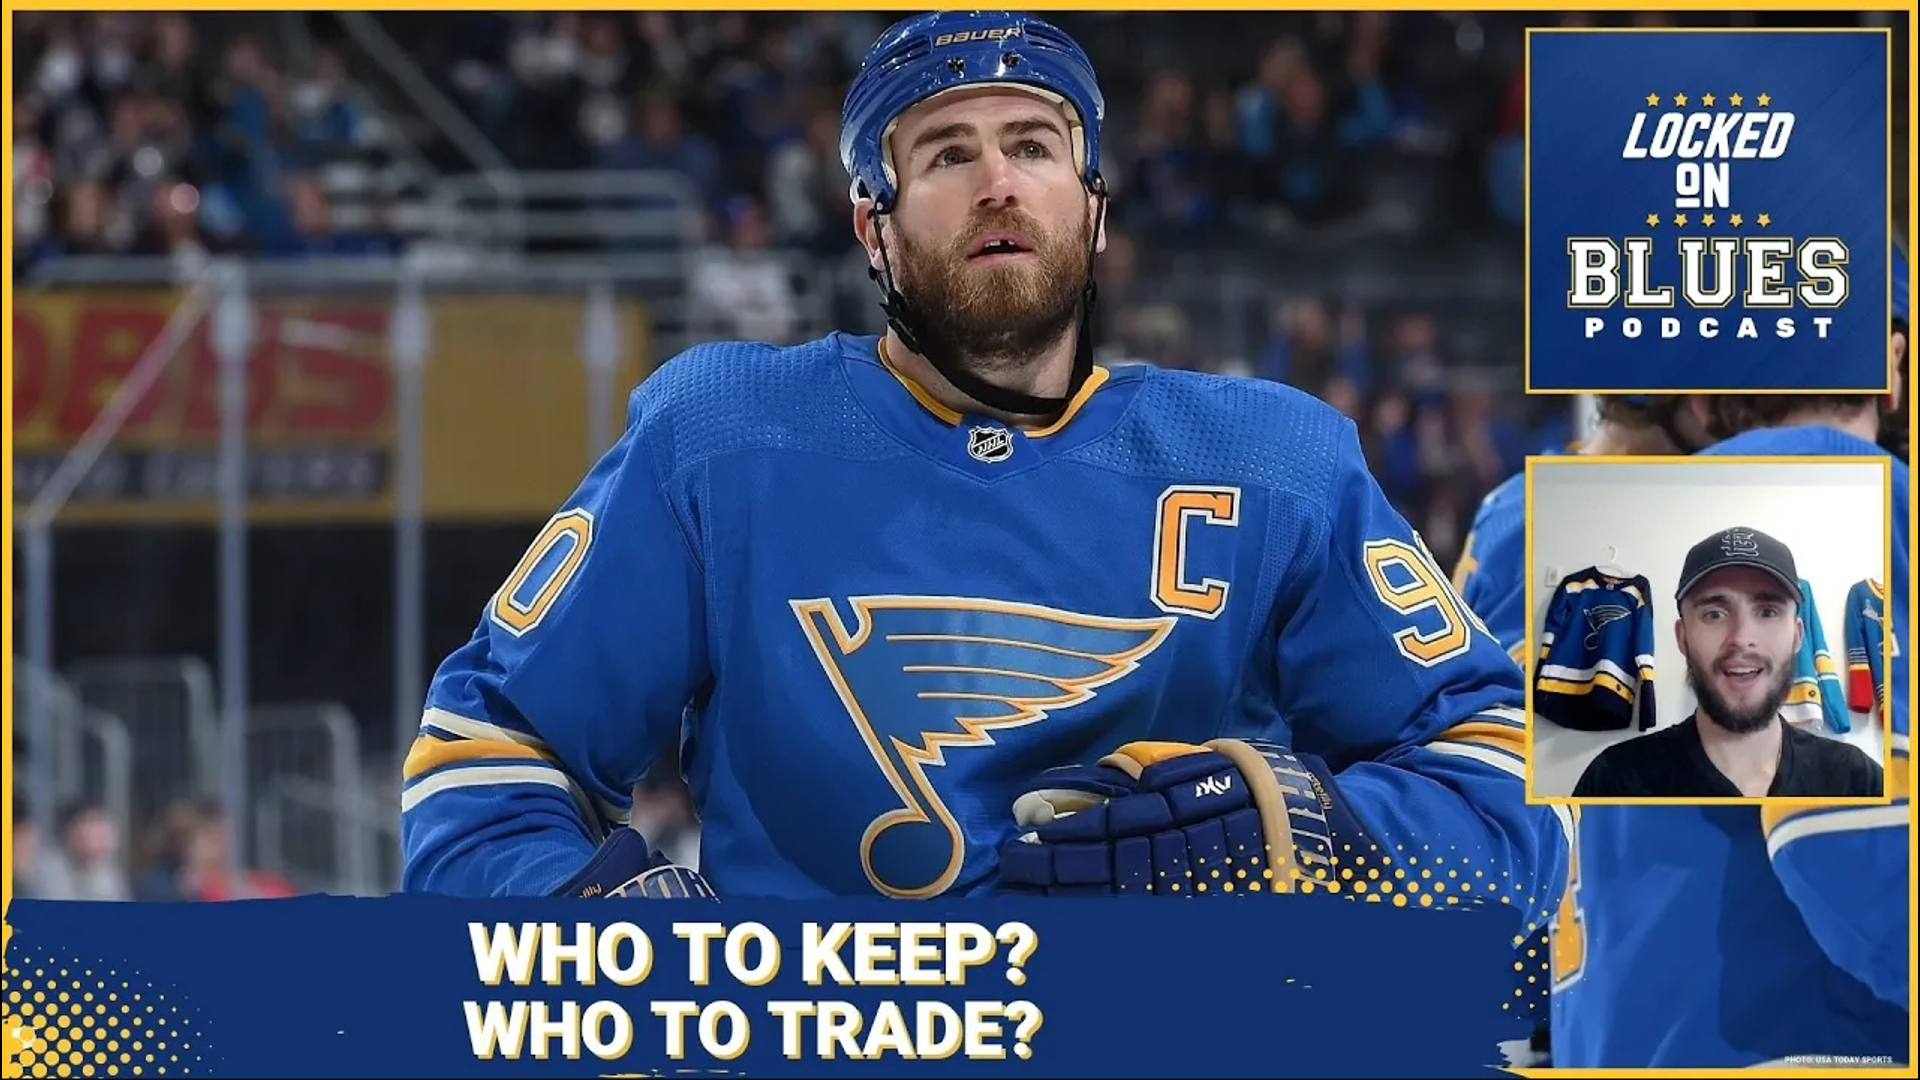 Josh Hyman examines the remaining players he thinks could be on the Trade Block for the St. Louis Blues. He gives his thoughts on whether they should be traded.